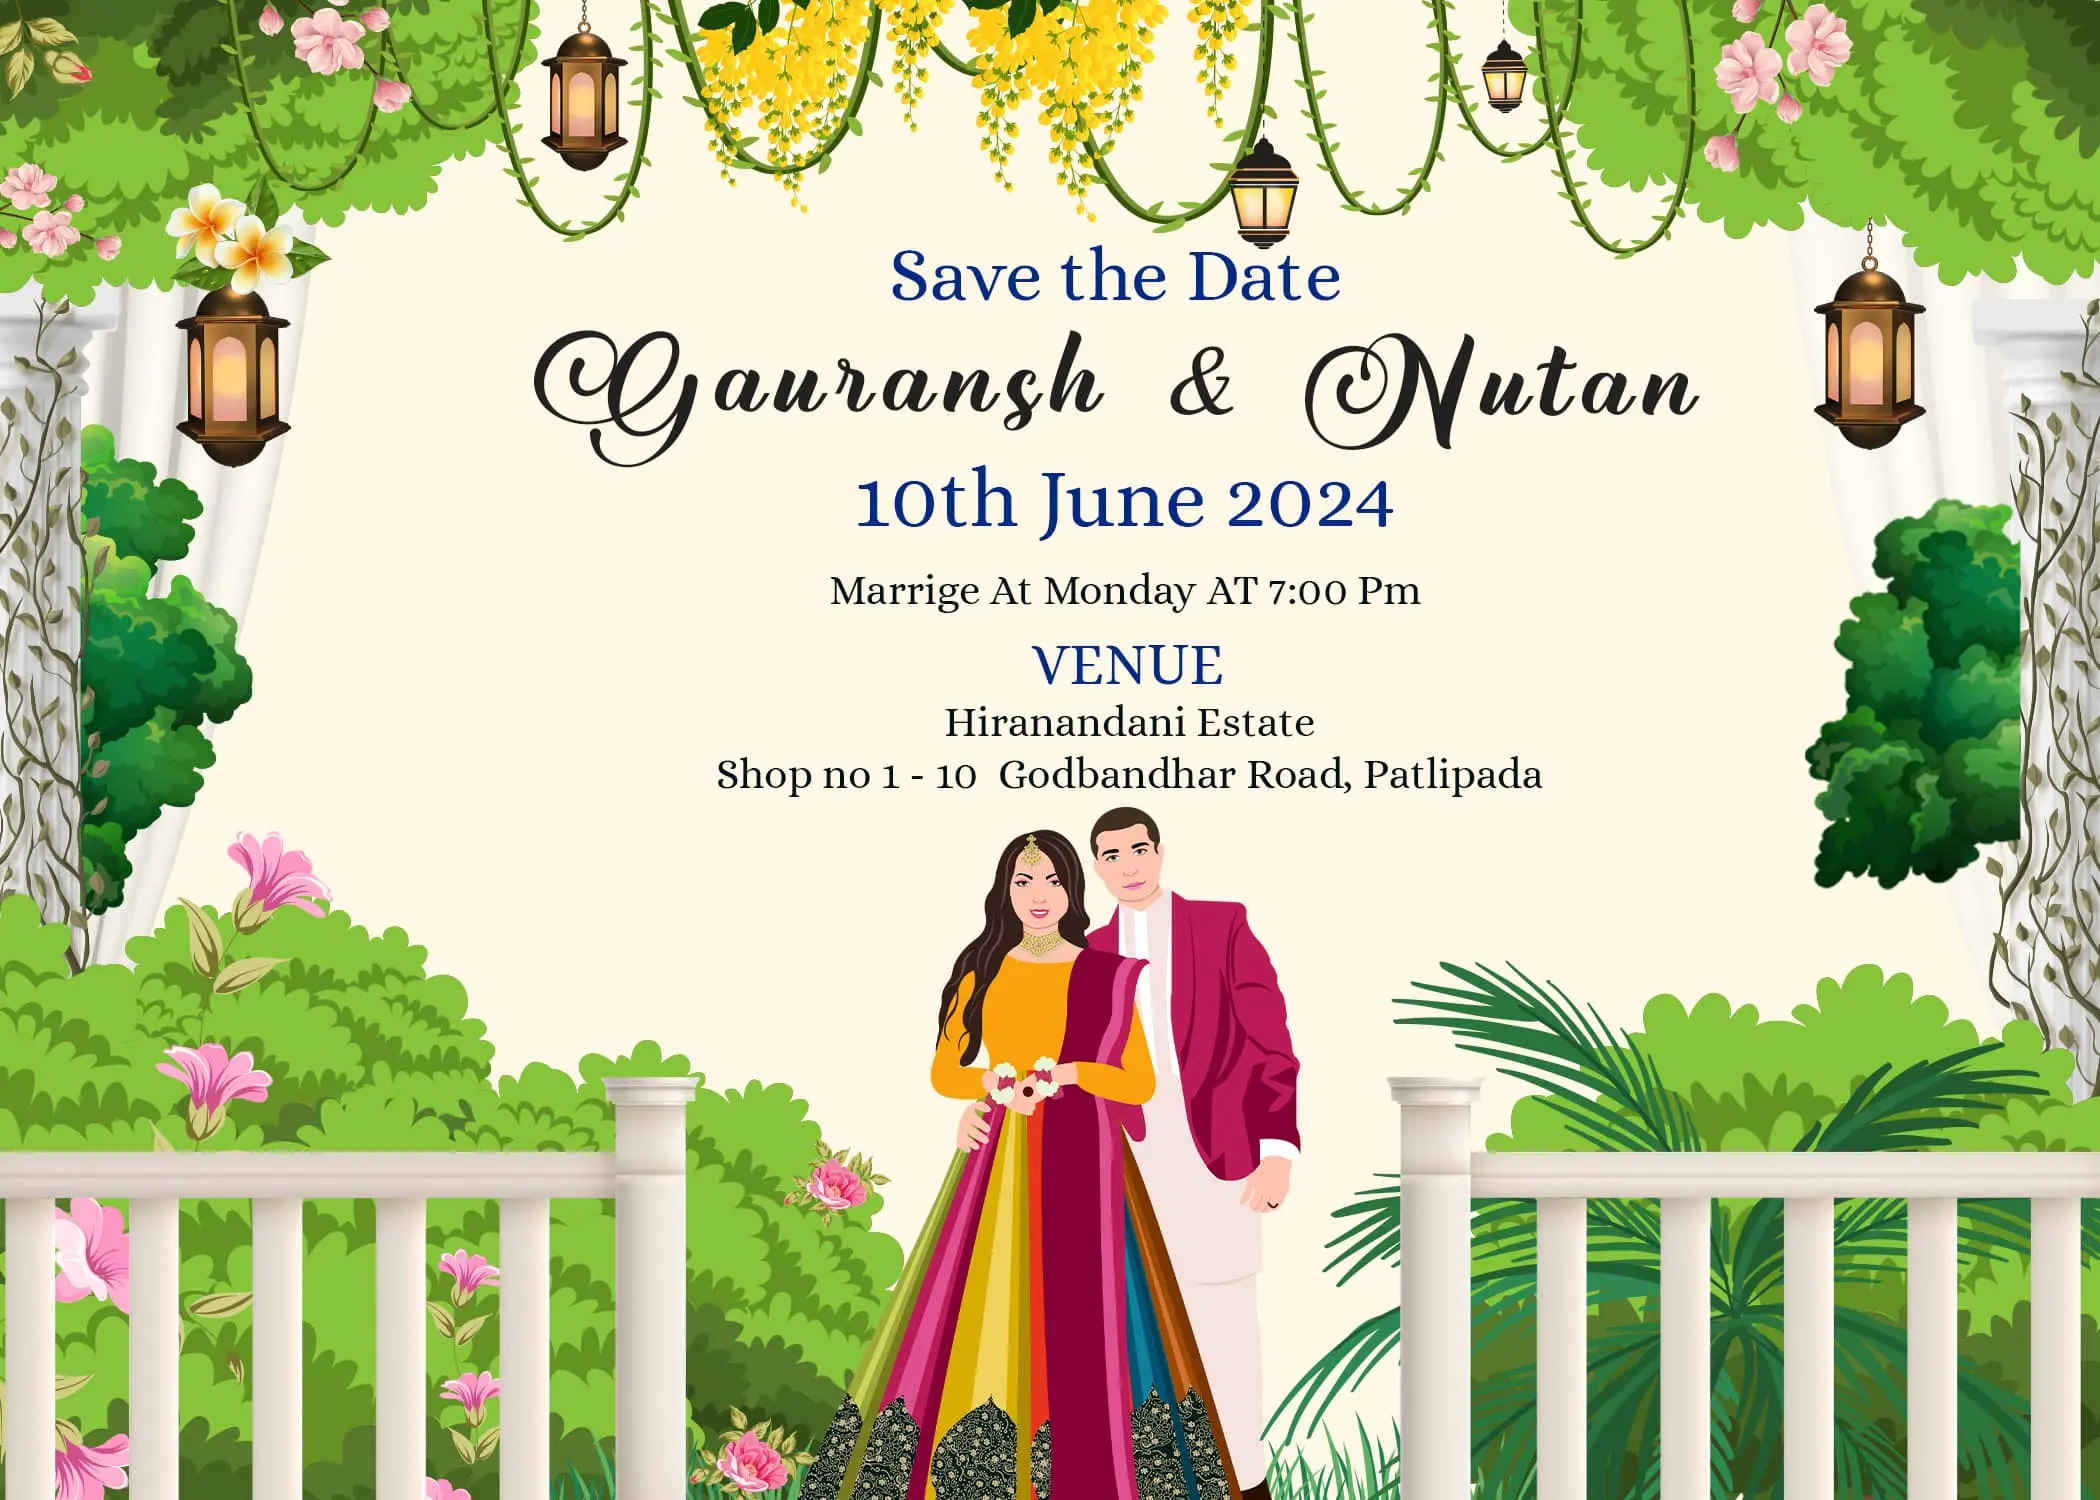 The Grandeur of Indian Wedding Invitation: A Feast for the Eyes